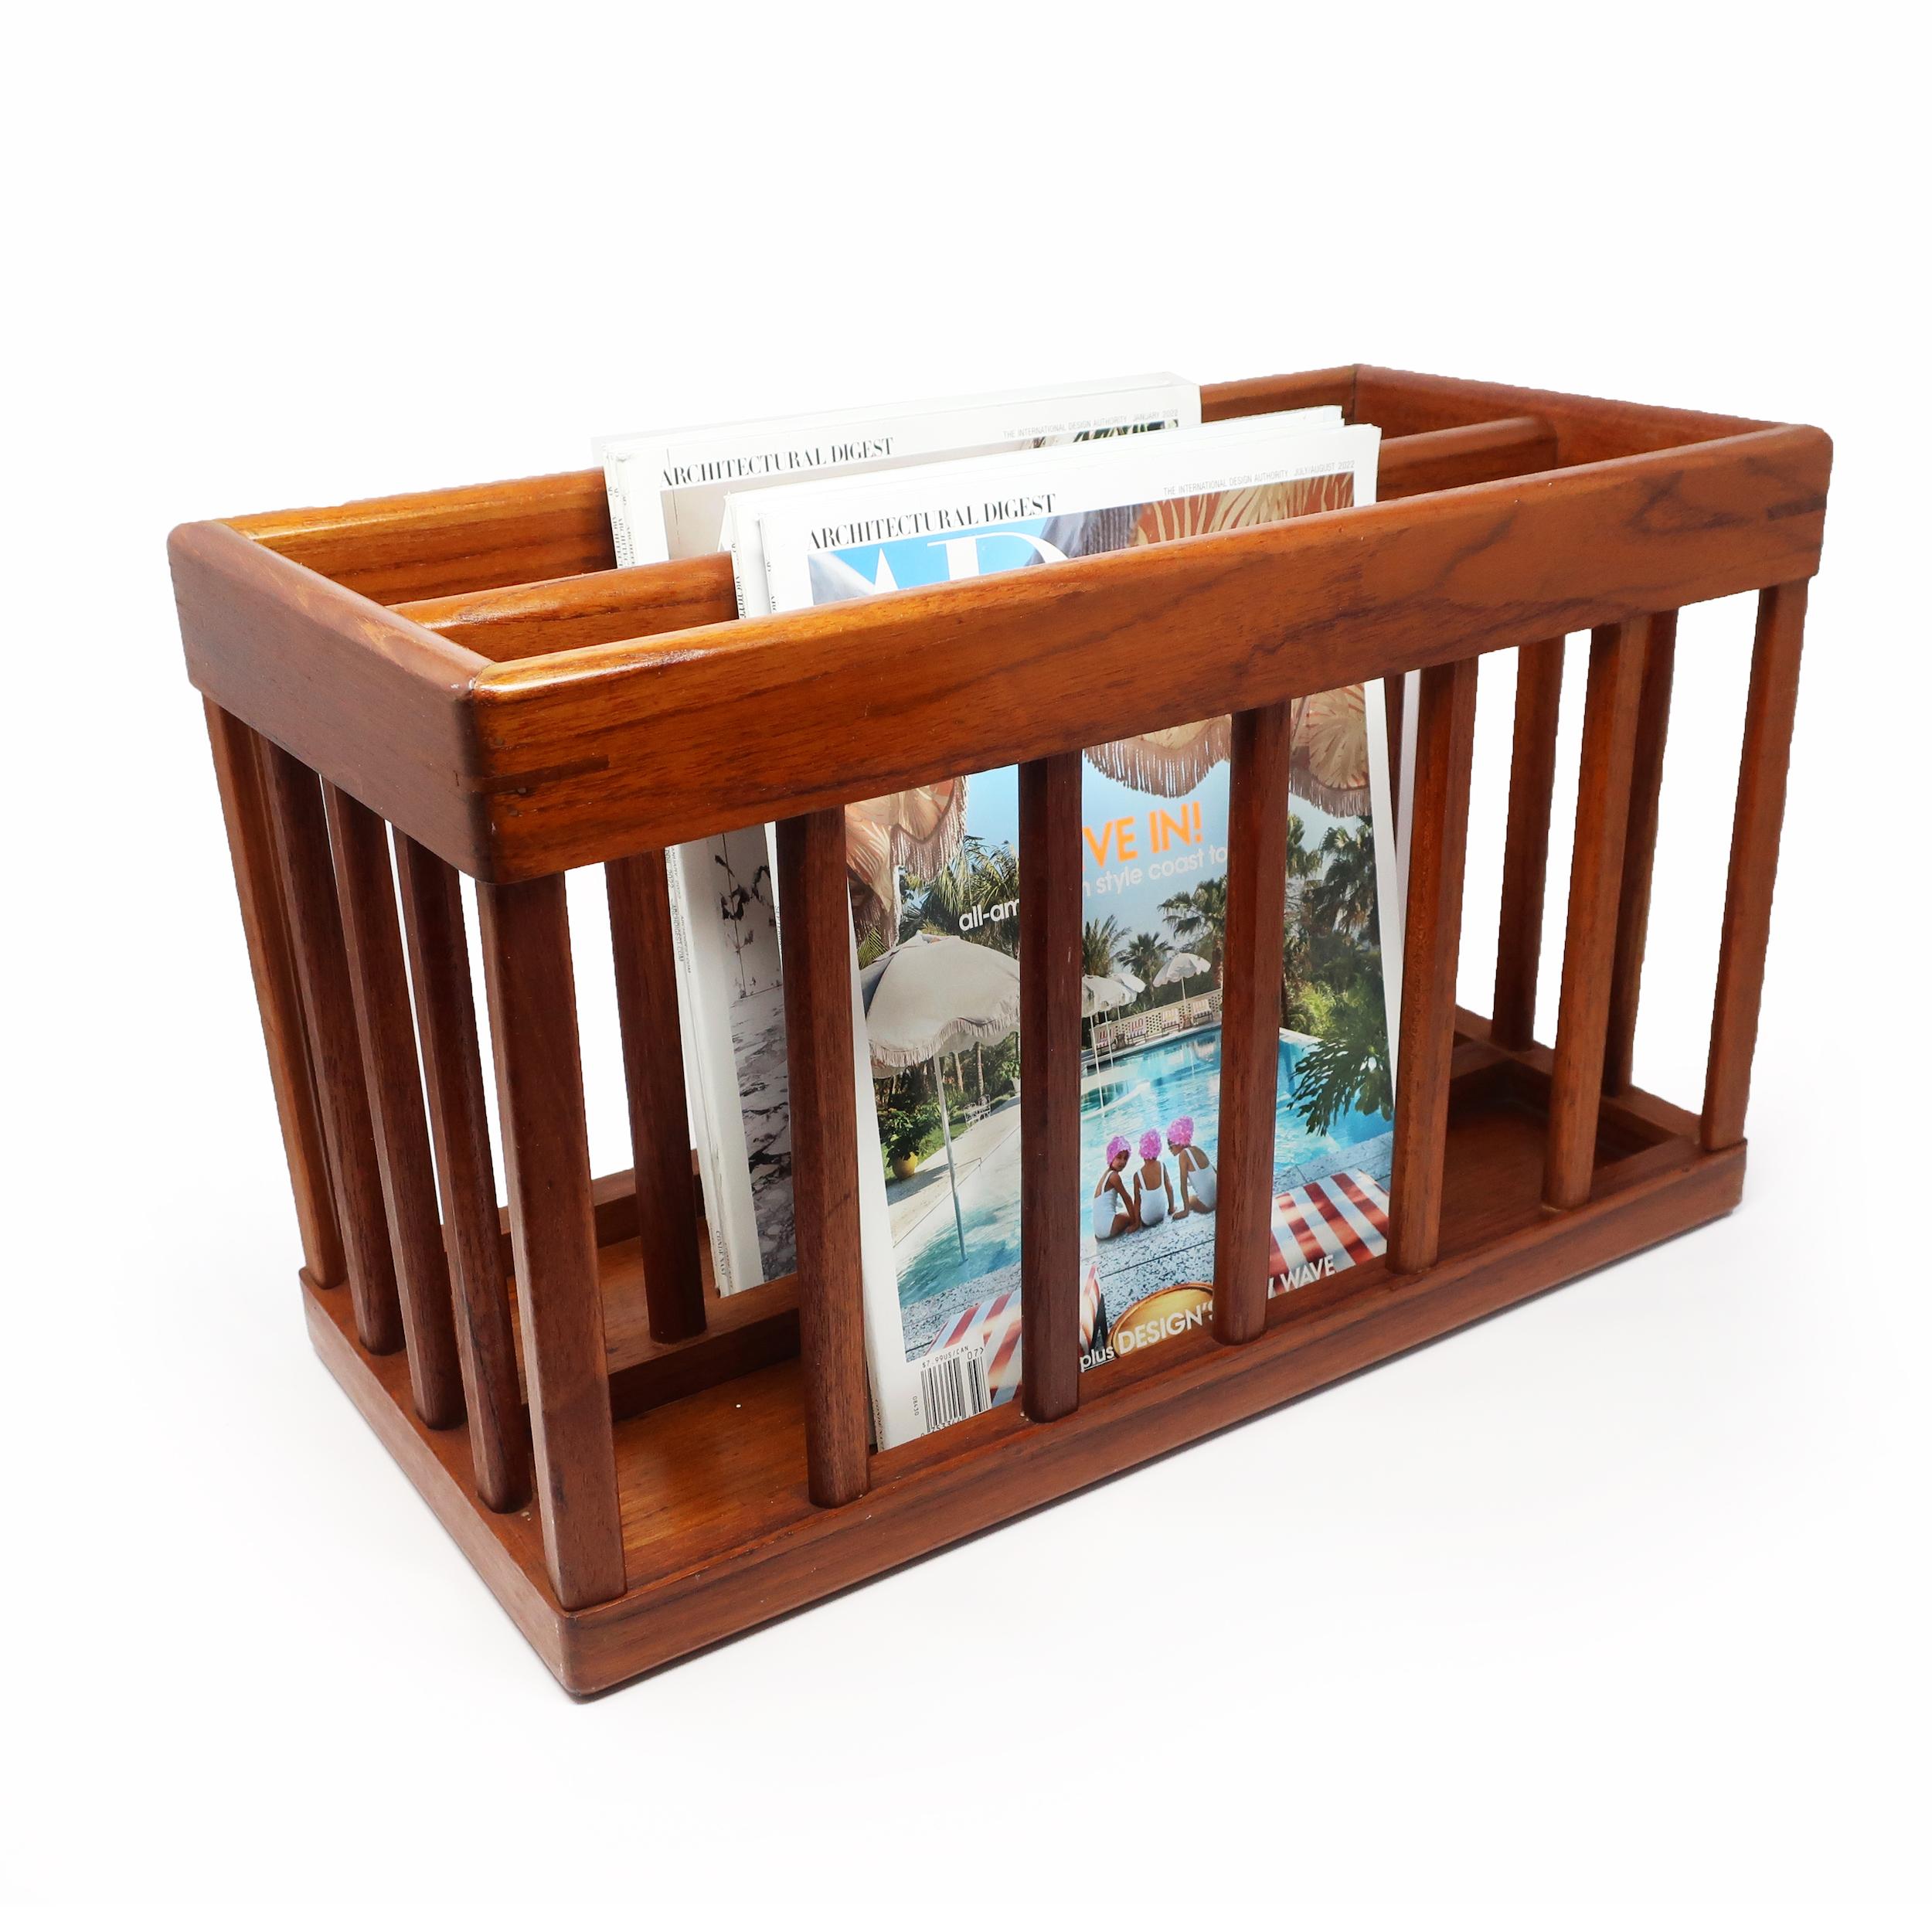 A gorgeous vintage mid-century modern teak magazine rack by Goodwood. Rectangular shape with vertical supports, two compartments, and a convenient carry handle. A timeless design that effortlessly blends with almost any décor style and is perfect